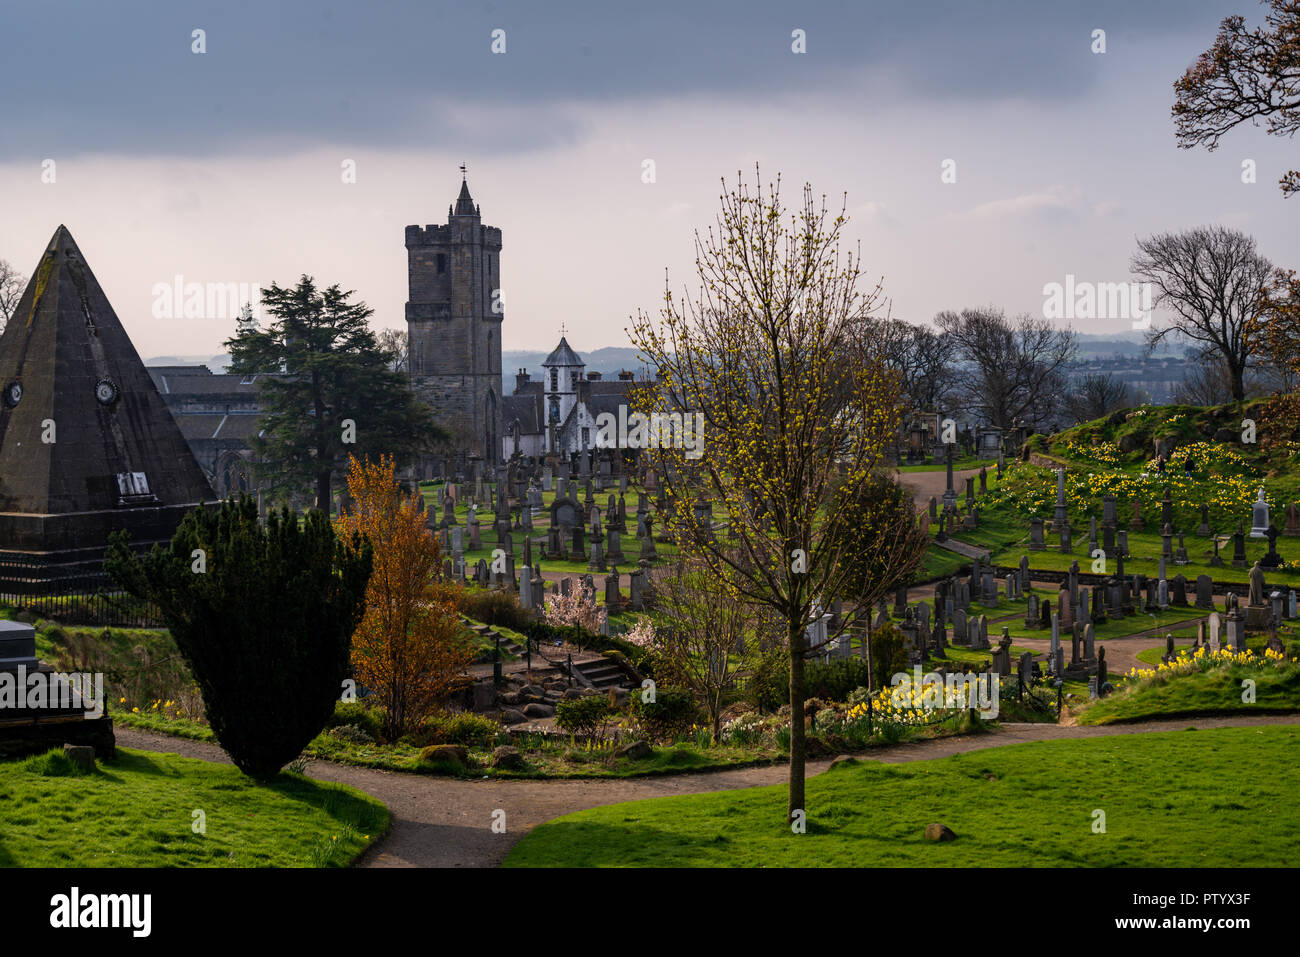 Graveyard, and church of the Holy Rude, Stirling, Scotland, United Kingdom Stock Photo